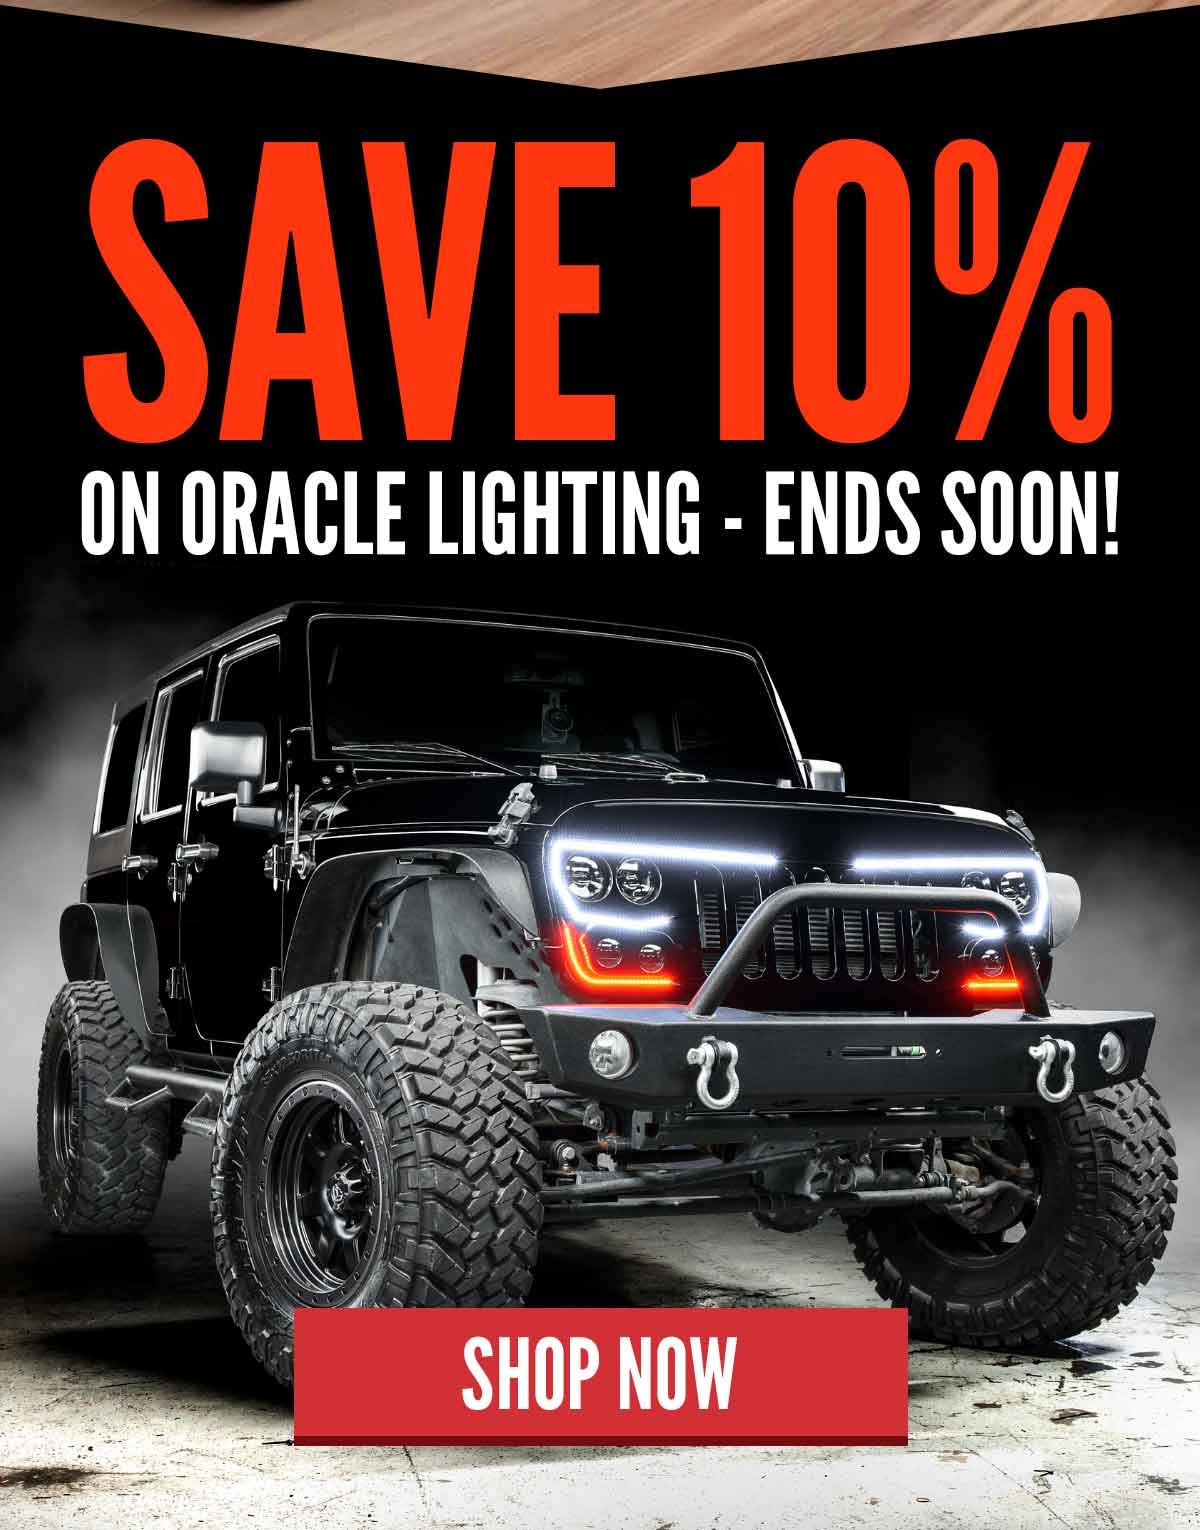 Save 10% On Oracle Lighting - Ends Soon!